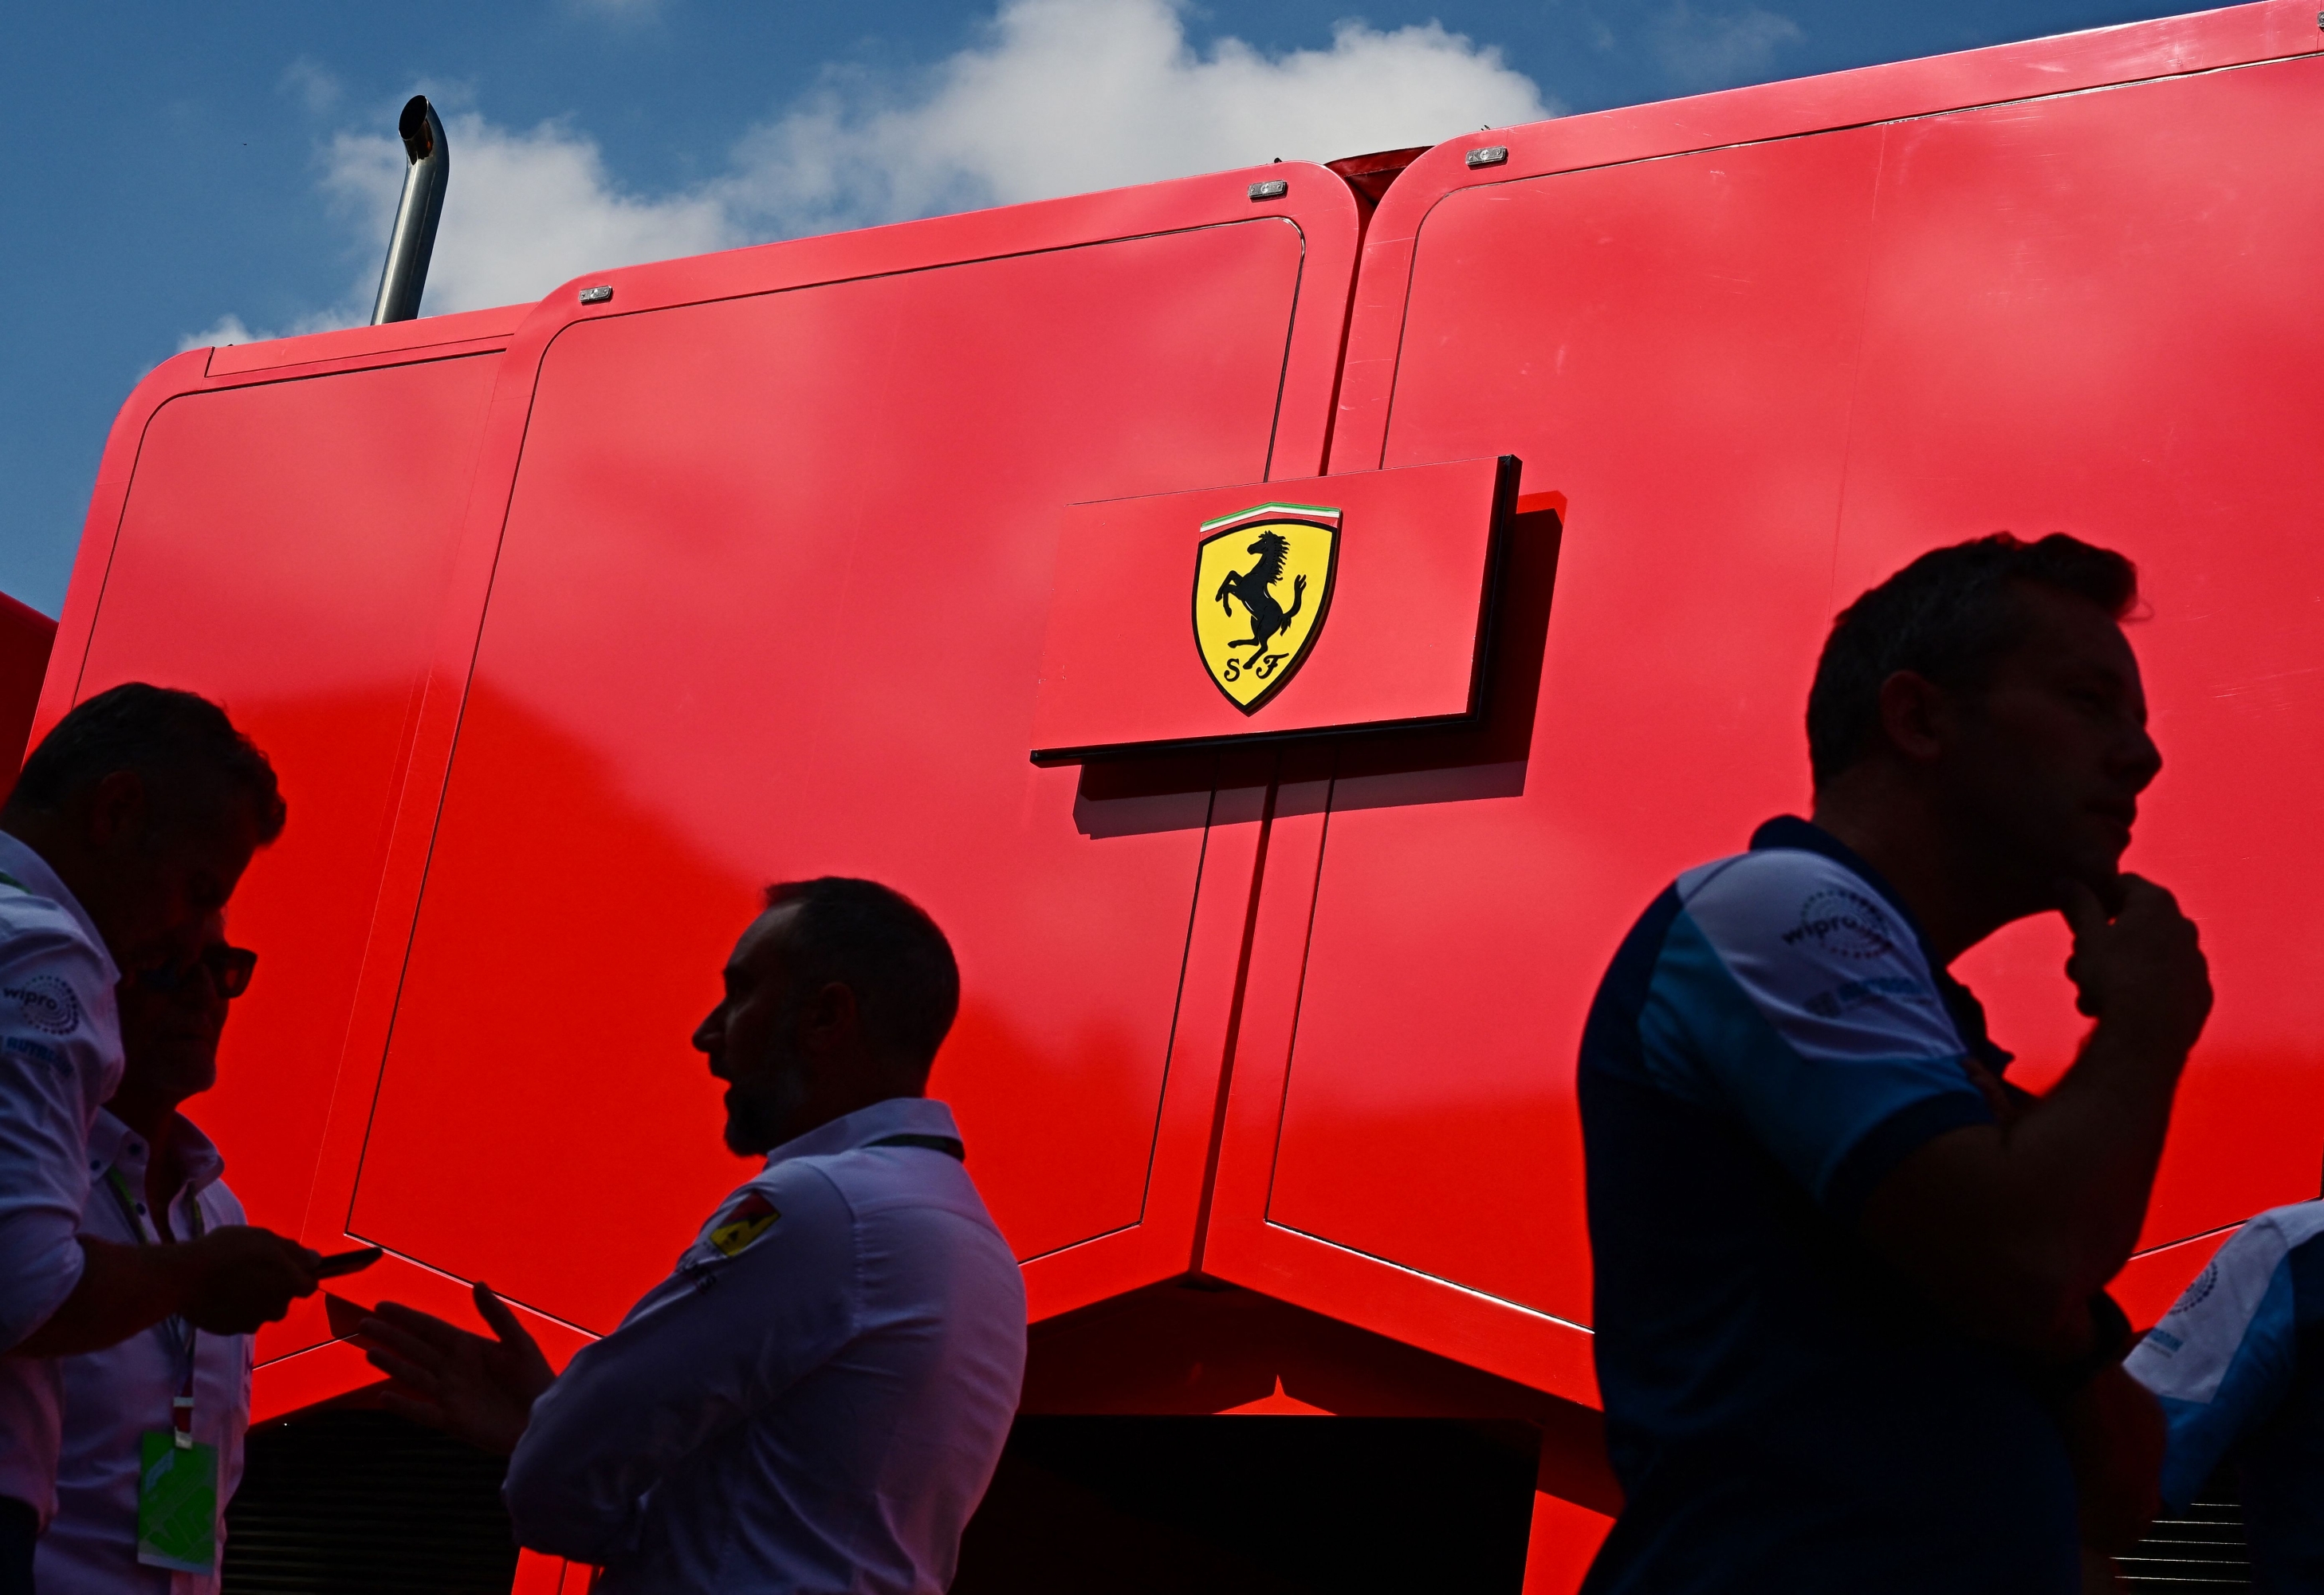 This picture taken on August 31, 2023 shows the Ferrari's logo on the truck at the paddock of the Monza Circuit ahead of the Italy's Formula One Grand Prix, in Monza northern Italy. The 2023 Italy's Grand Prix will take place on September 3, 2023. (Photo by Marco BERTORELLO / AFP)